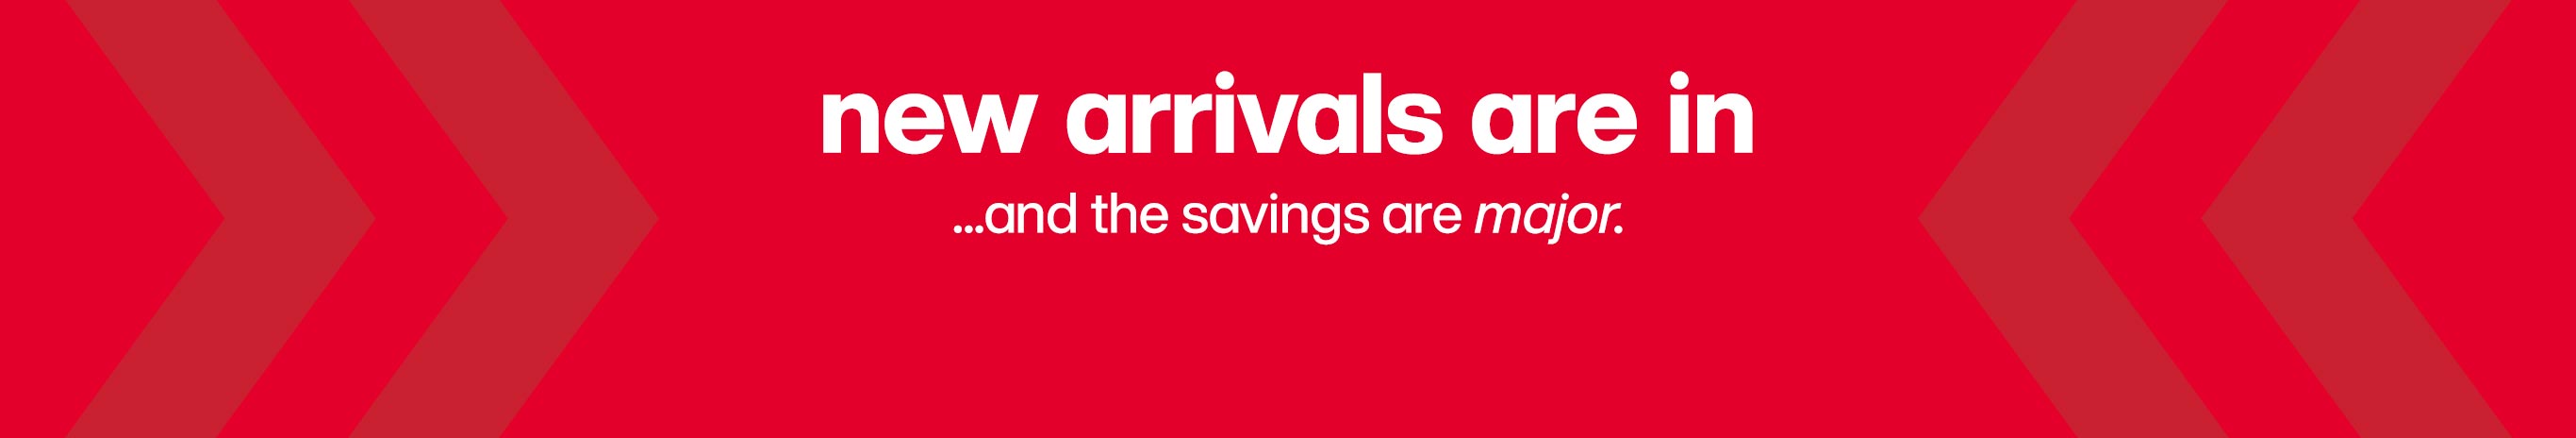 New arrivals are in ...and the savings are major.